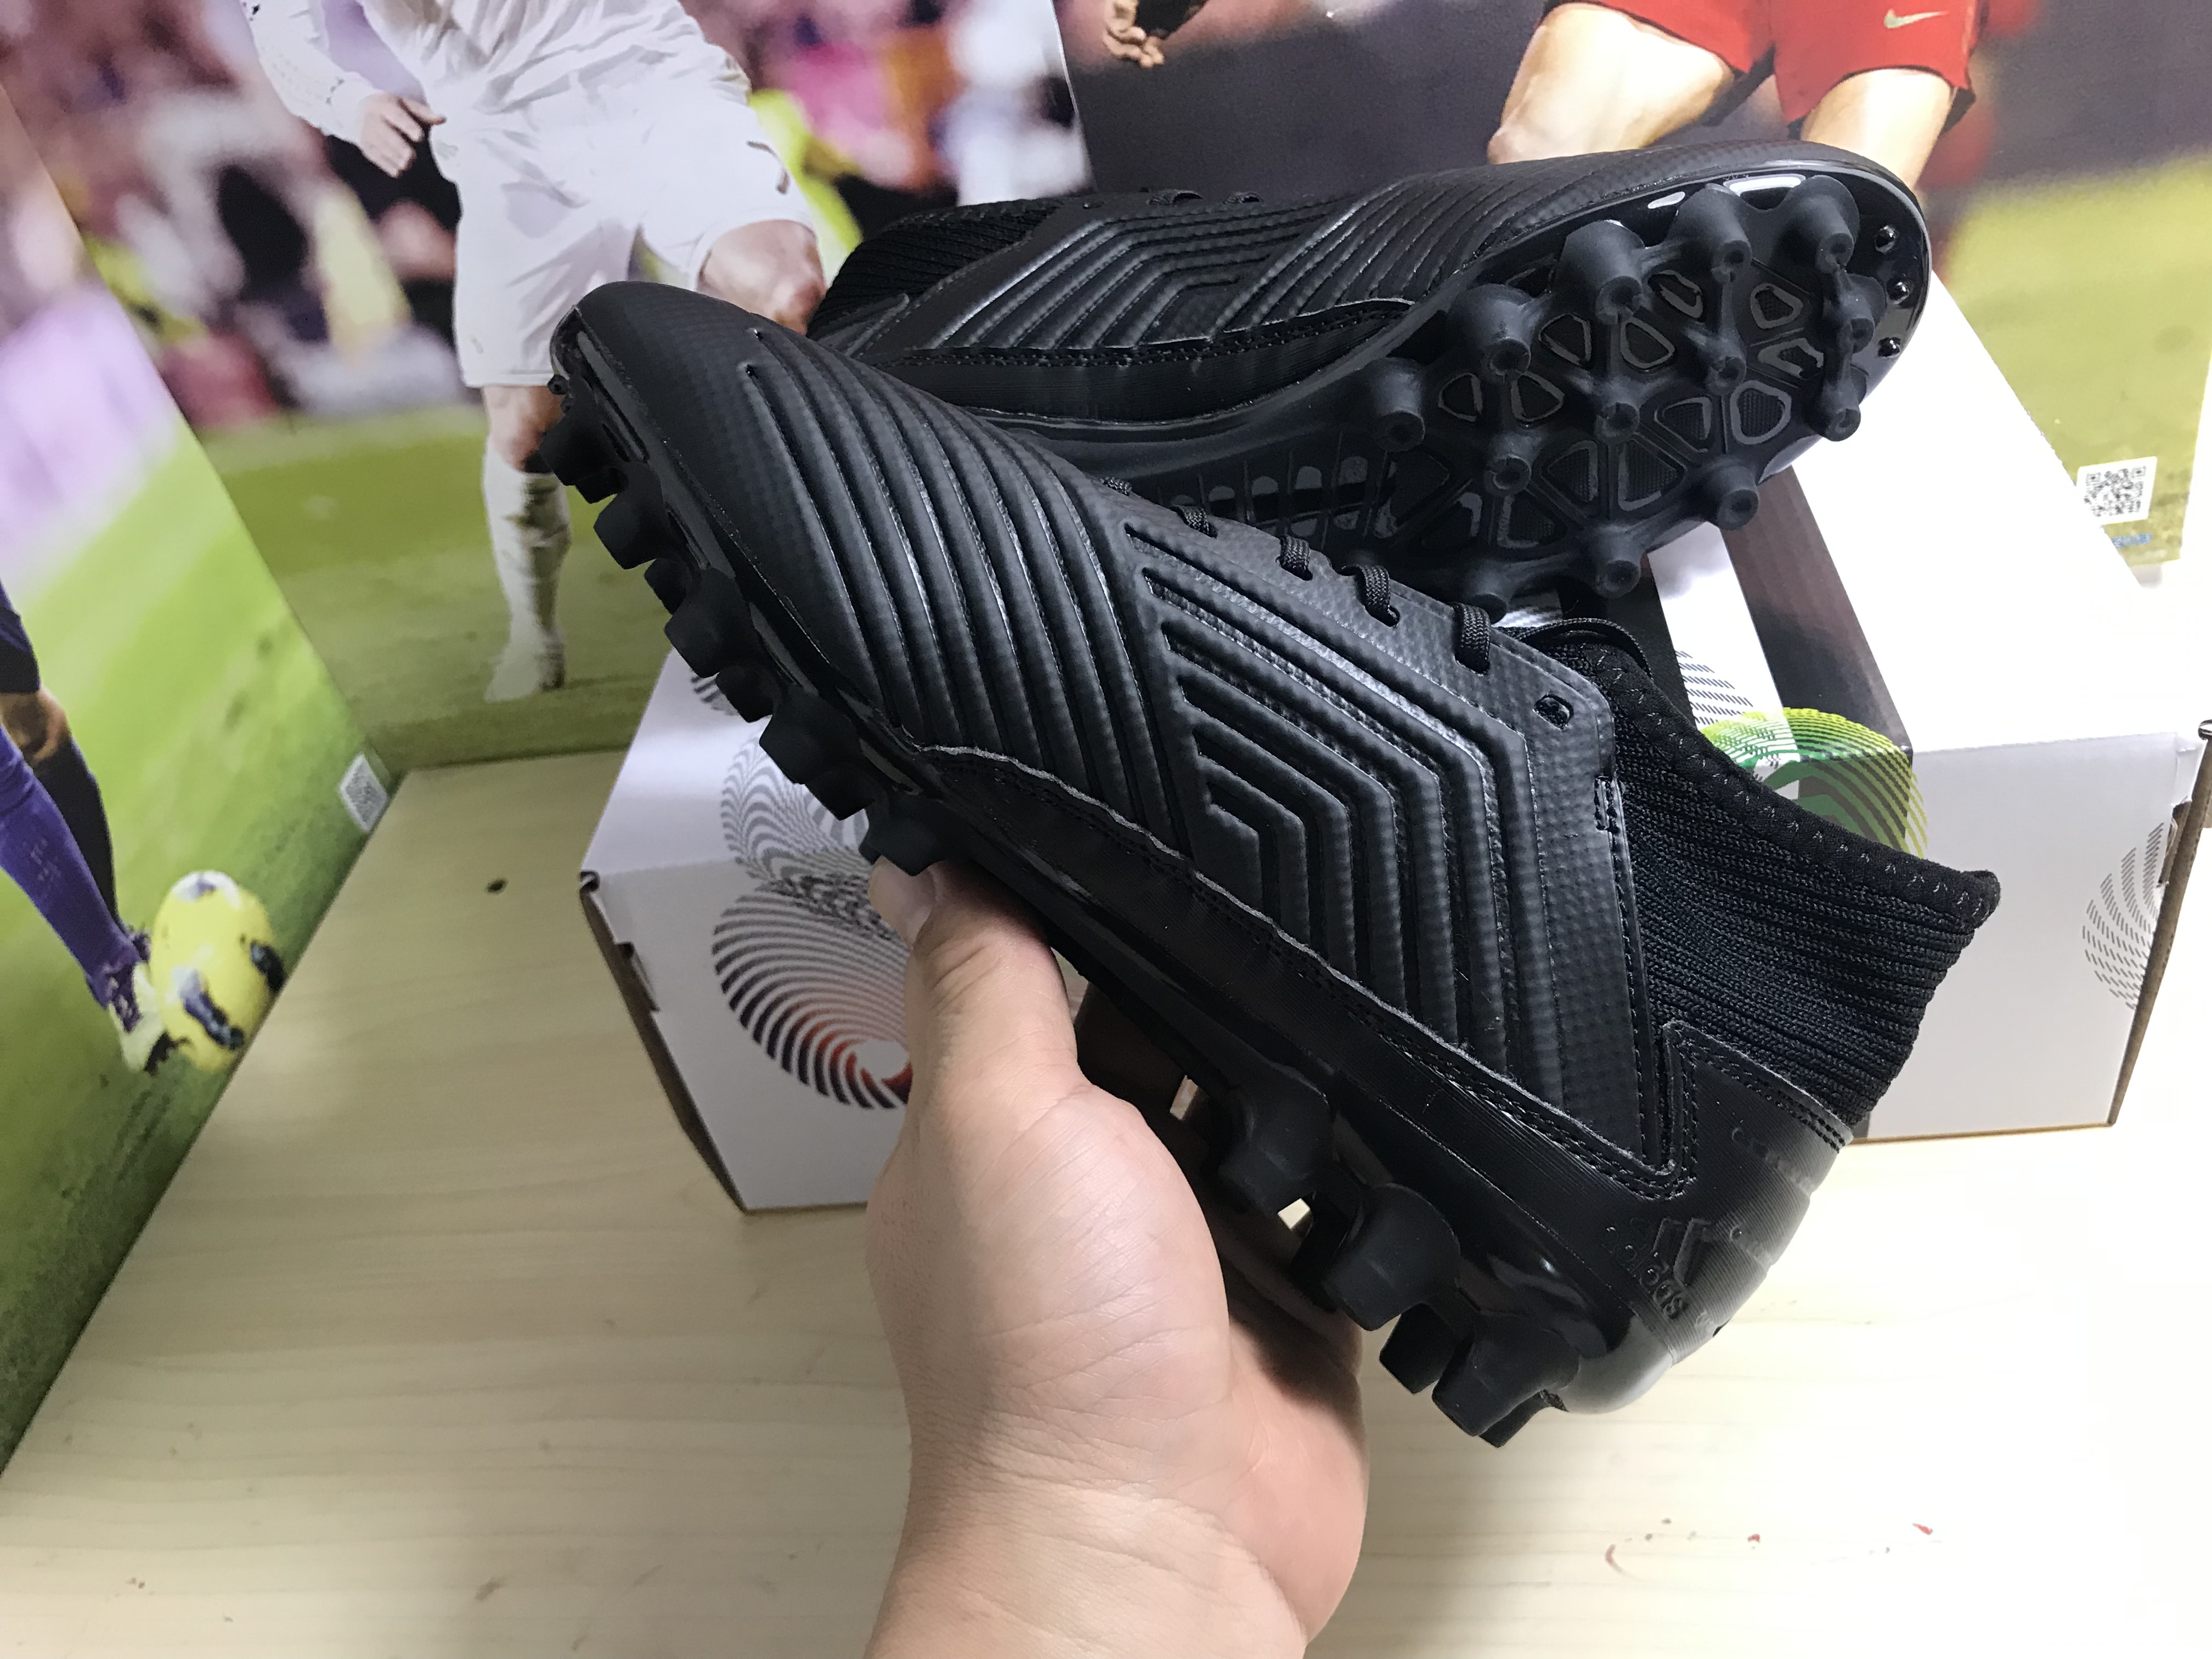 Adidas Predator 19.1 AG Black EF8982 - Dynamic Performance and Superior Traction for Agility